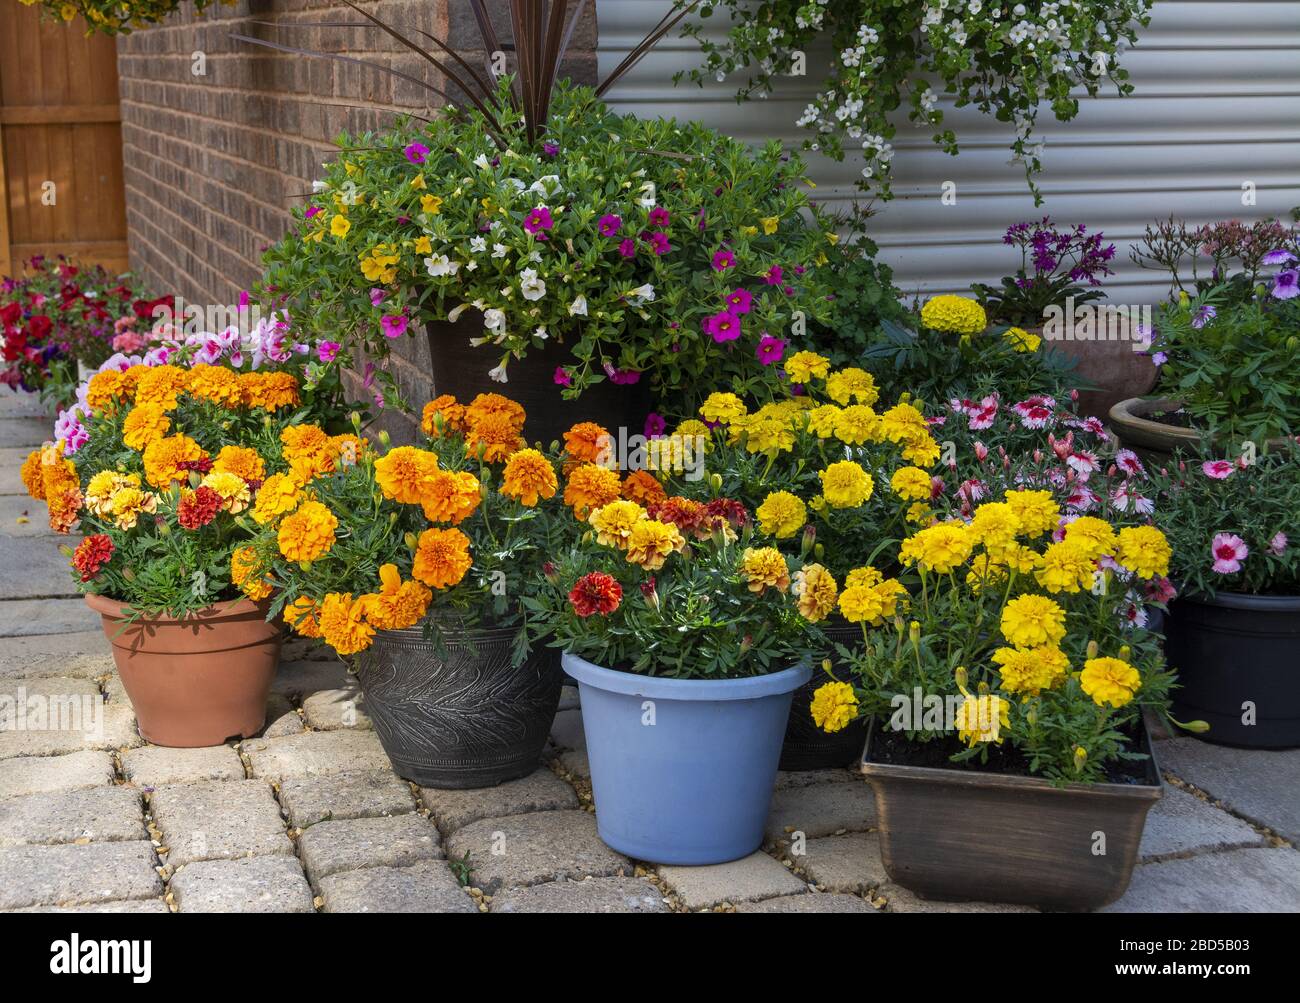 Flowers Pots Marigolds High Resolution Stock Photography and Images - Alamy